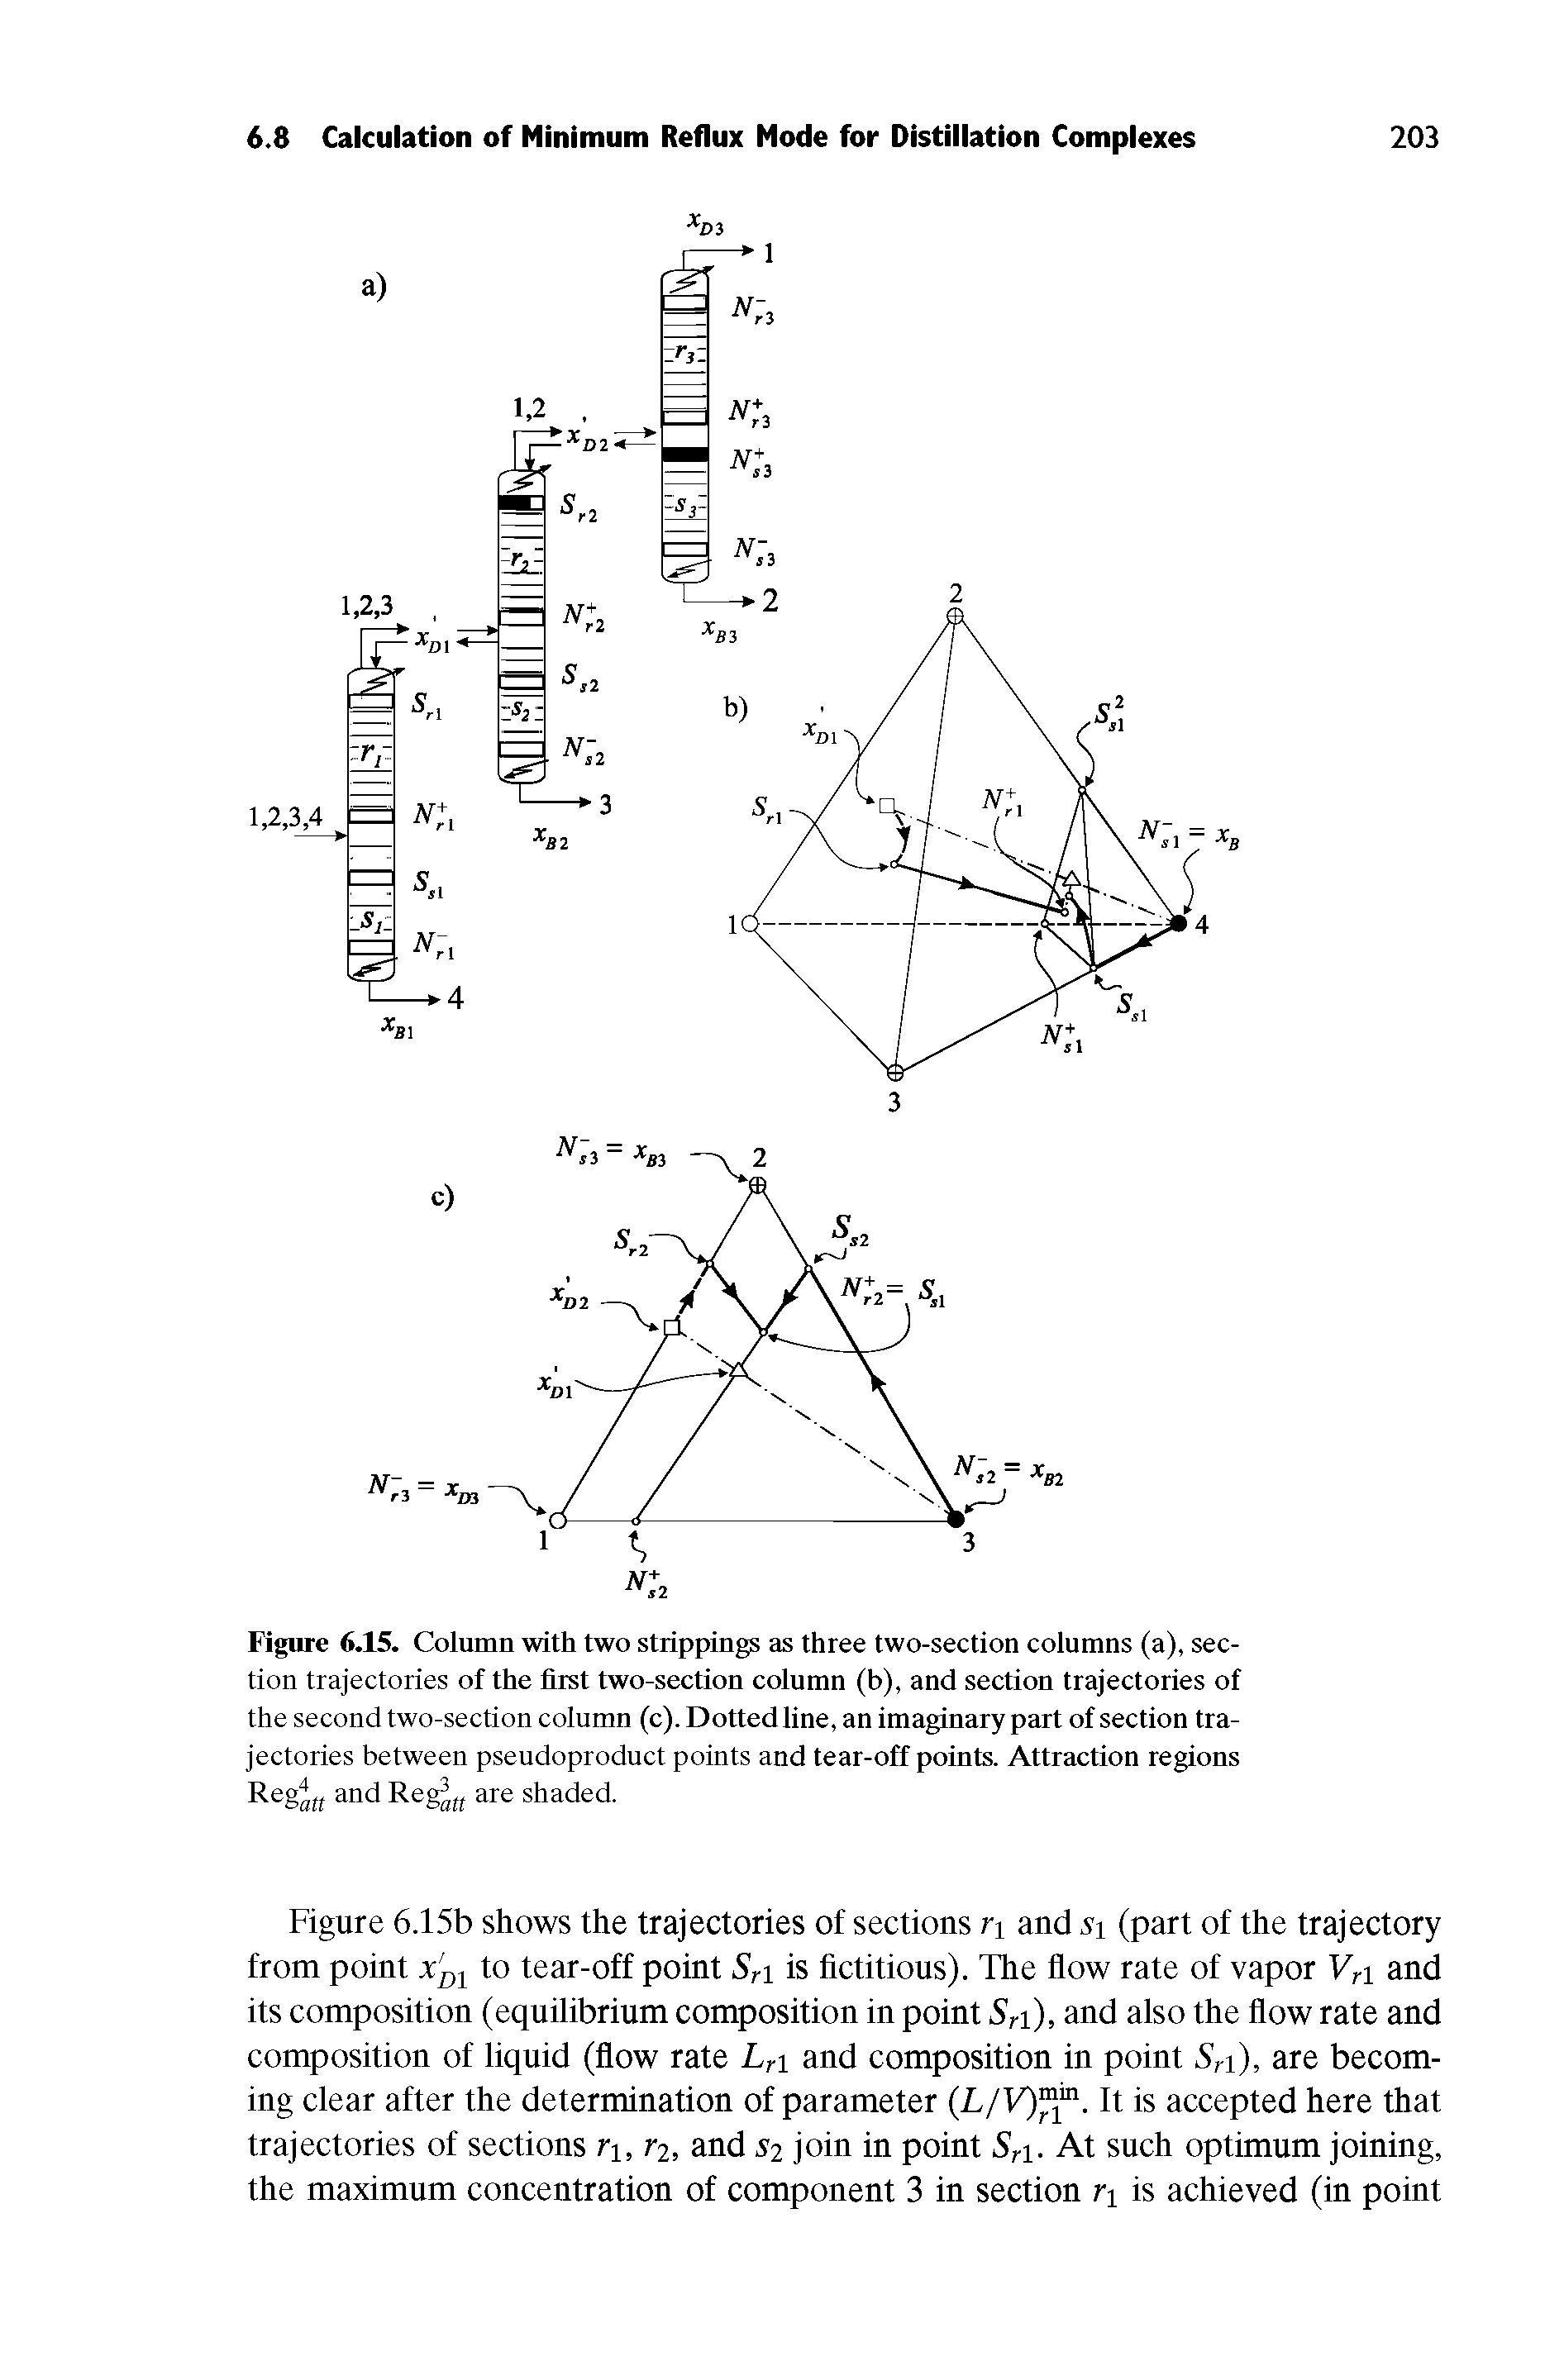 Figure 6.15. Column with two strippings as three two-section columns (a), section trajectories of the first two-section column (b), and section trajectories of the second two-section column (c). Dotted line, an imaginary part of section trajectories between pseudoproduct points and tear-off points. Attraction regions...